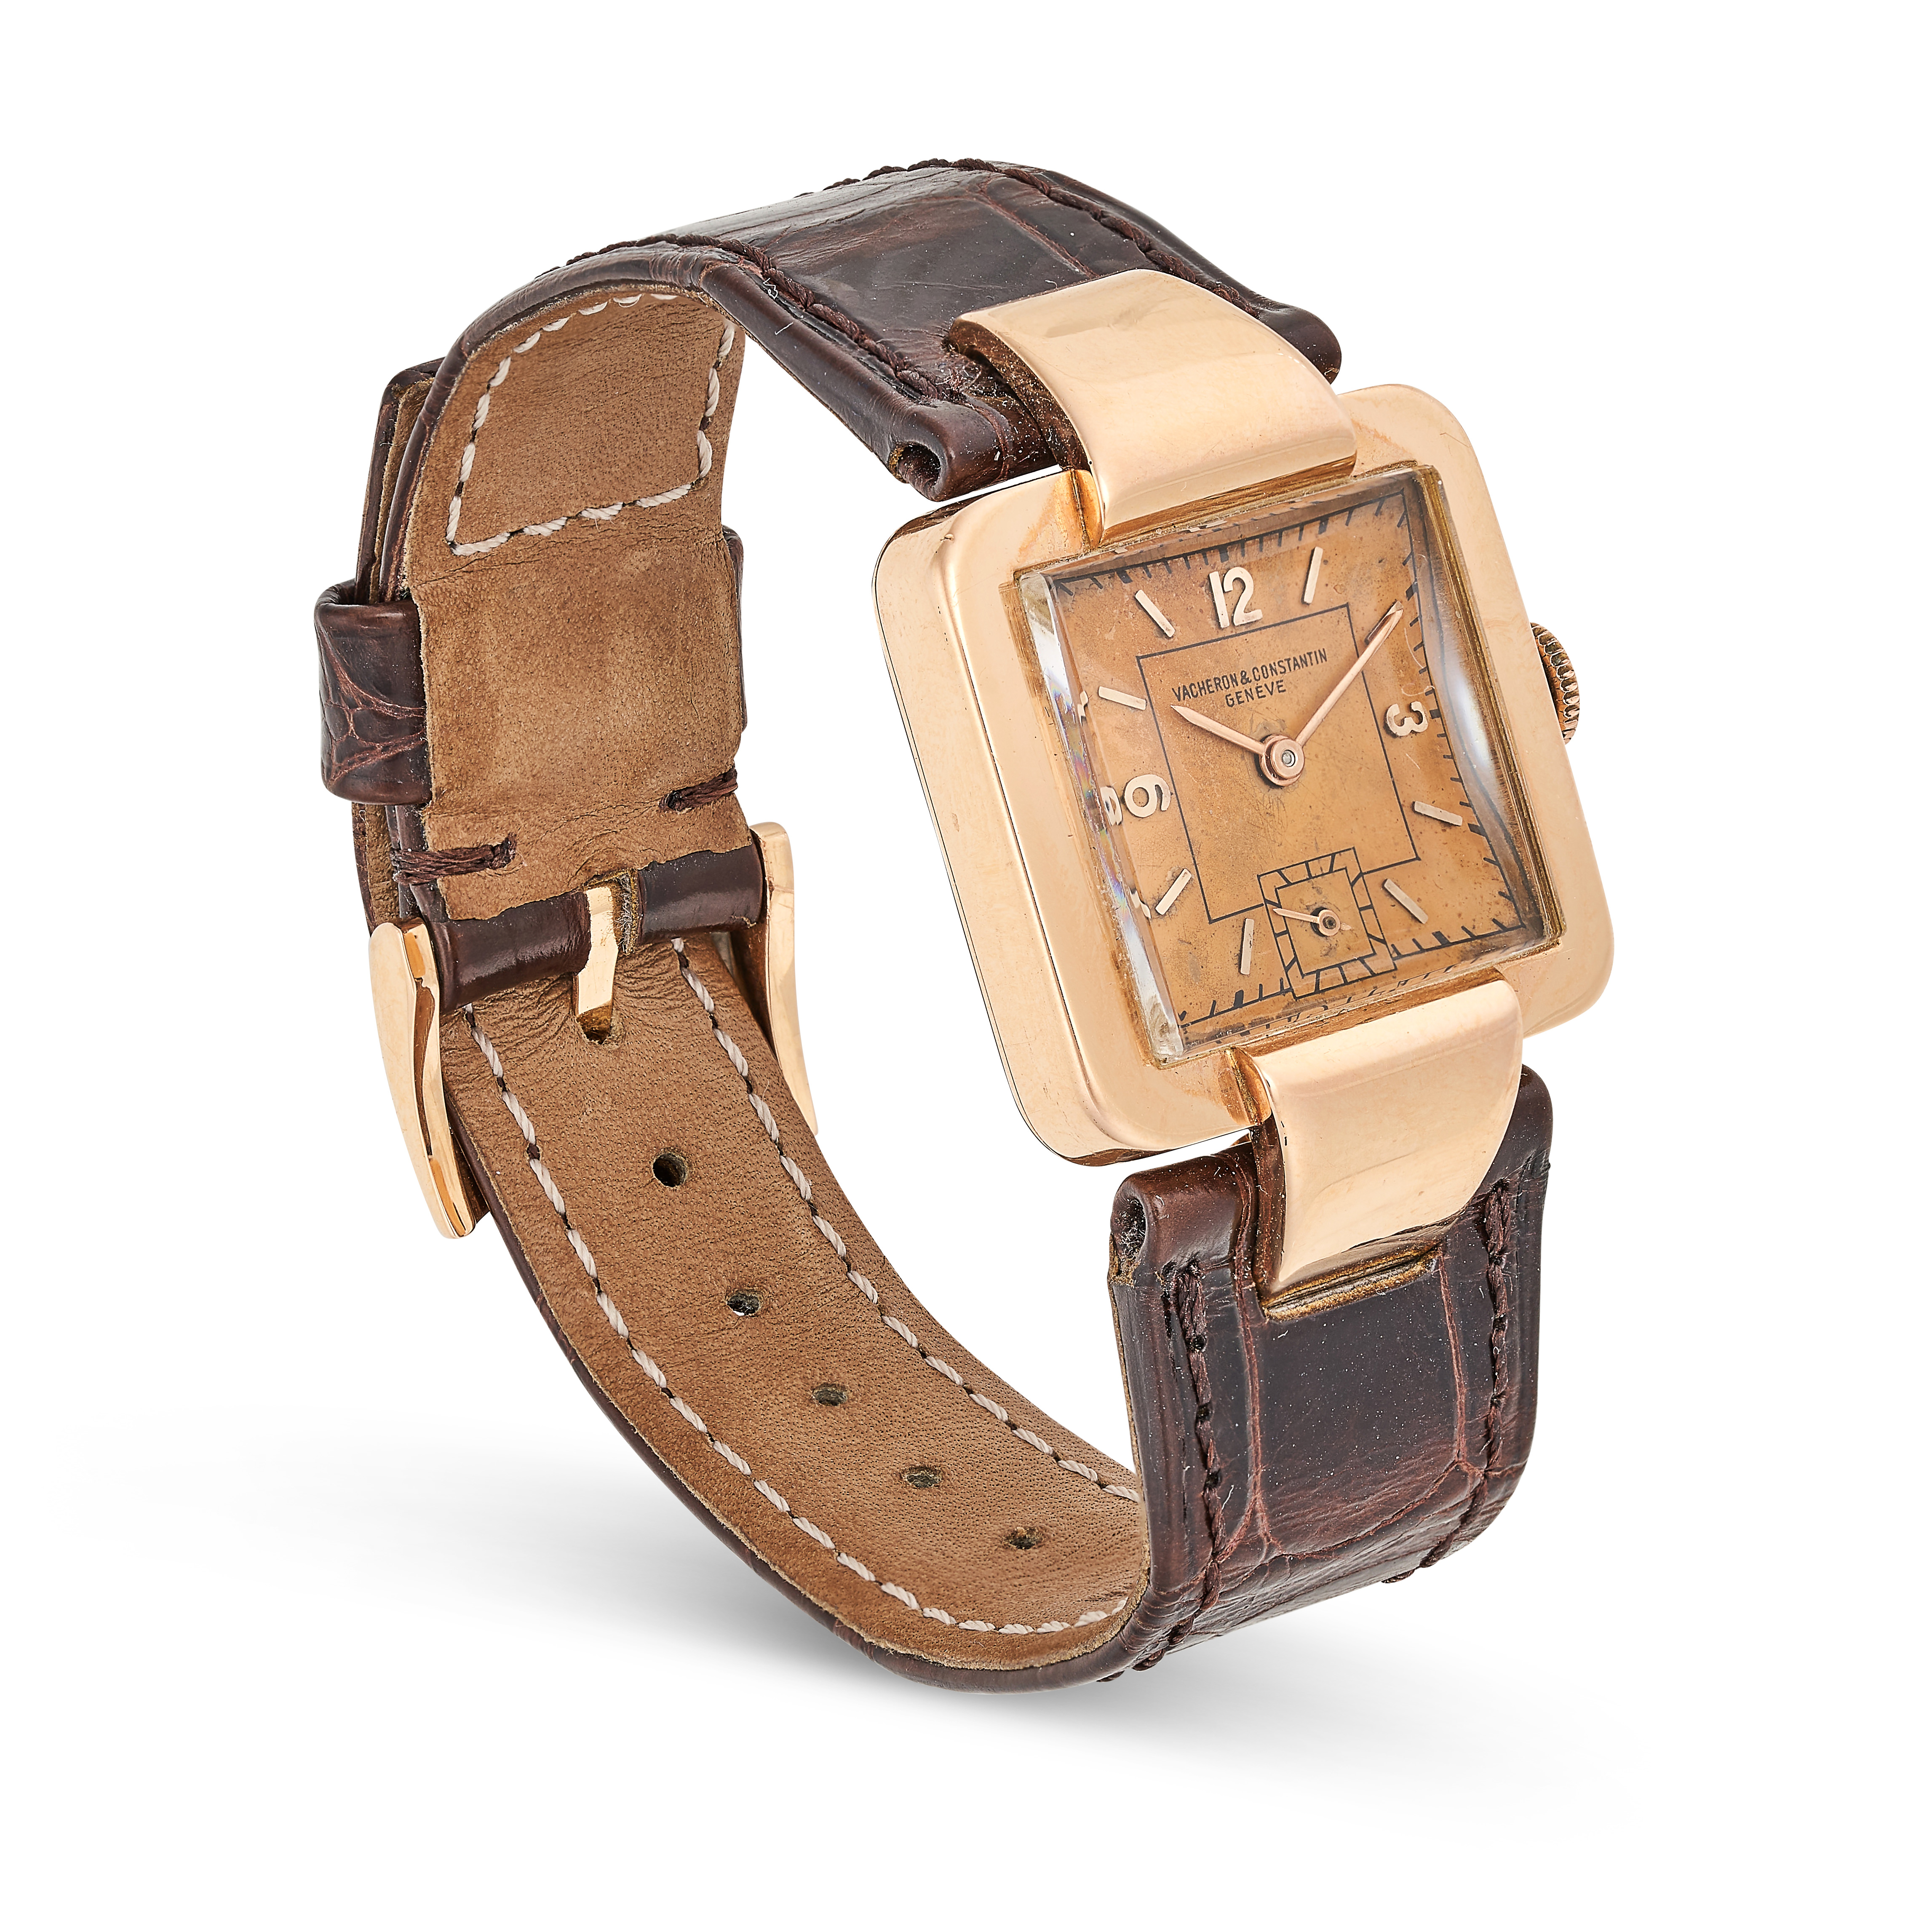 VACHERON & CONSTANTIN, A VINTAGE LADIES' WRISTWATCH in 18ct rose gold, with square face and tan dial - Image 2 of 2